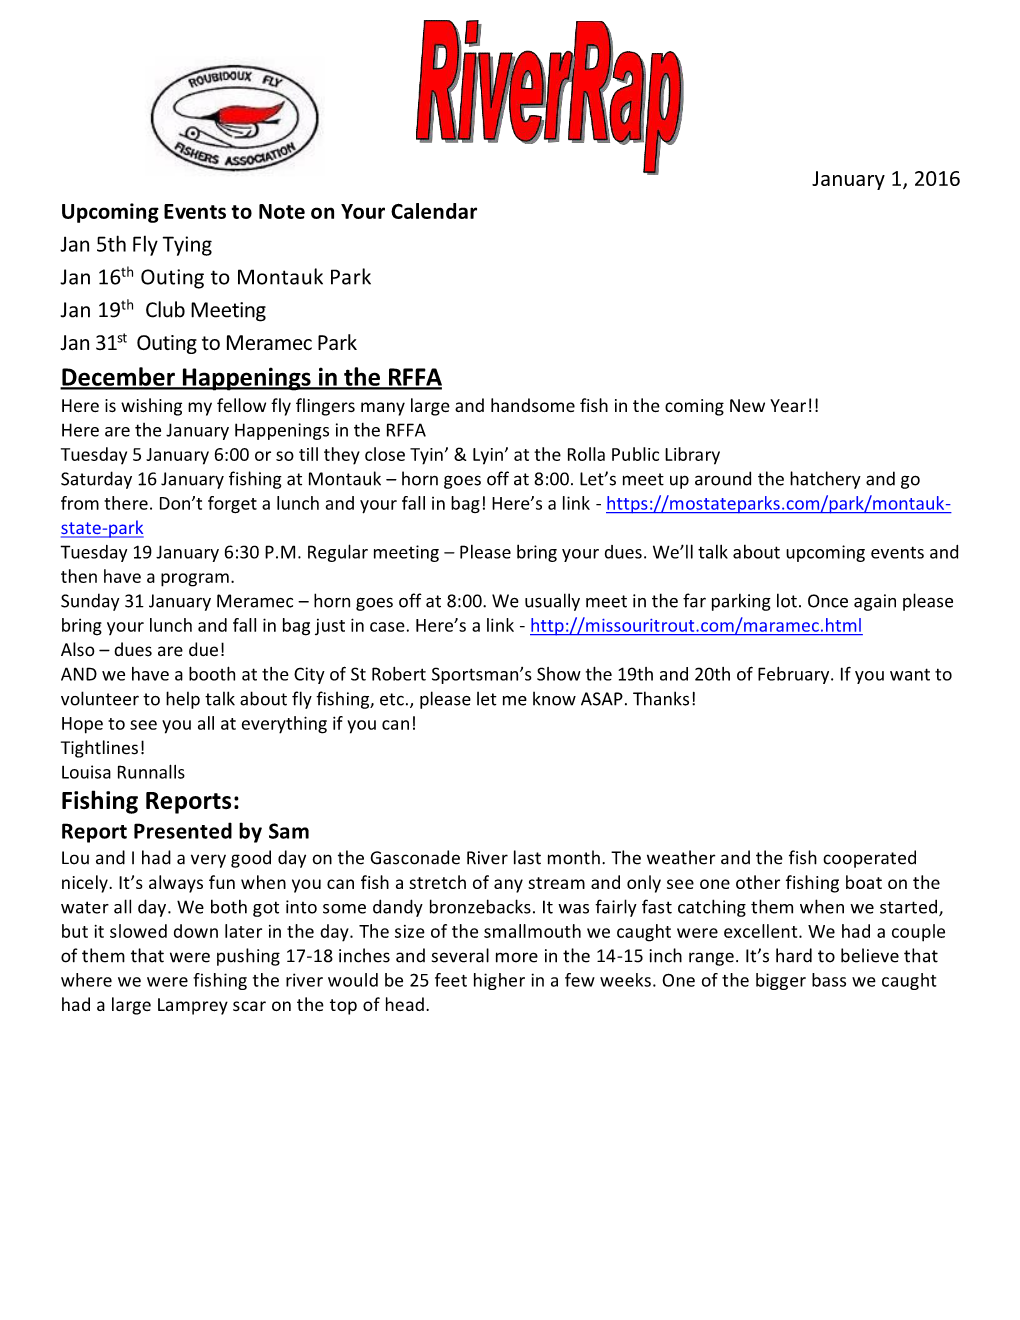 December Happenings in the RFFA Fishing Reports